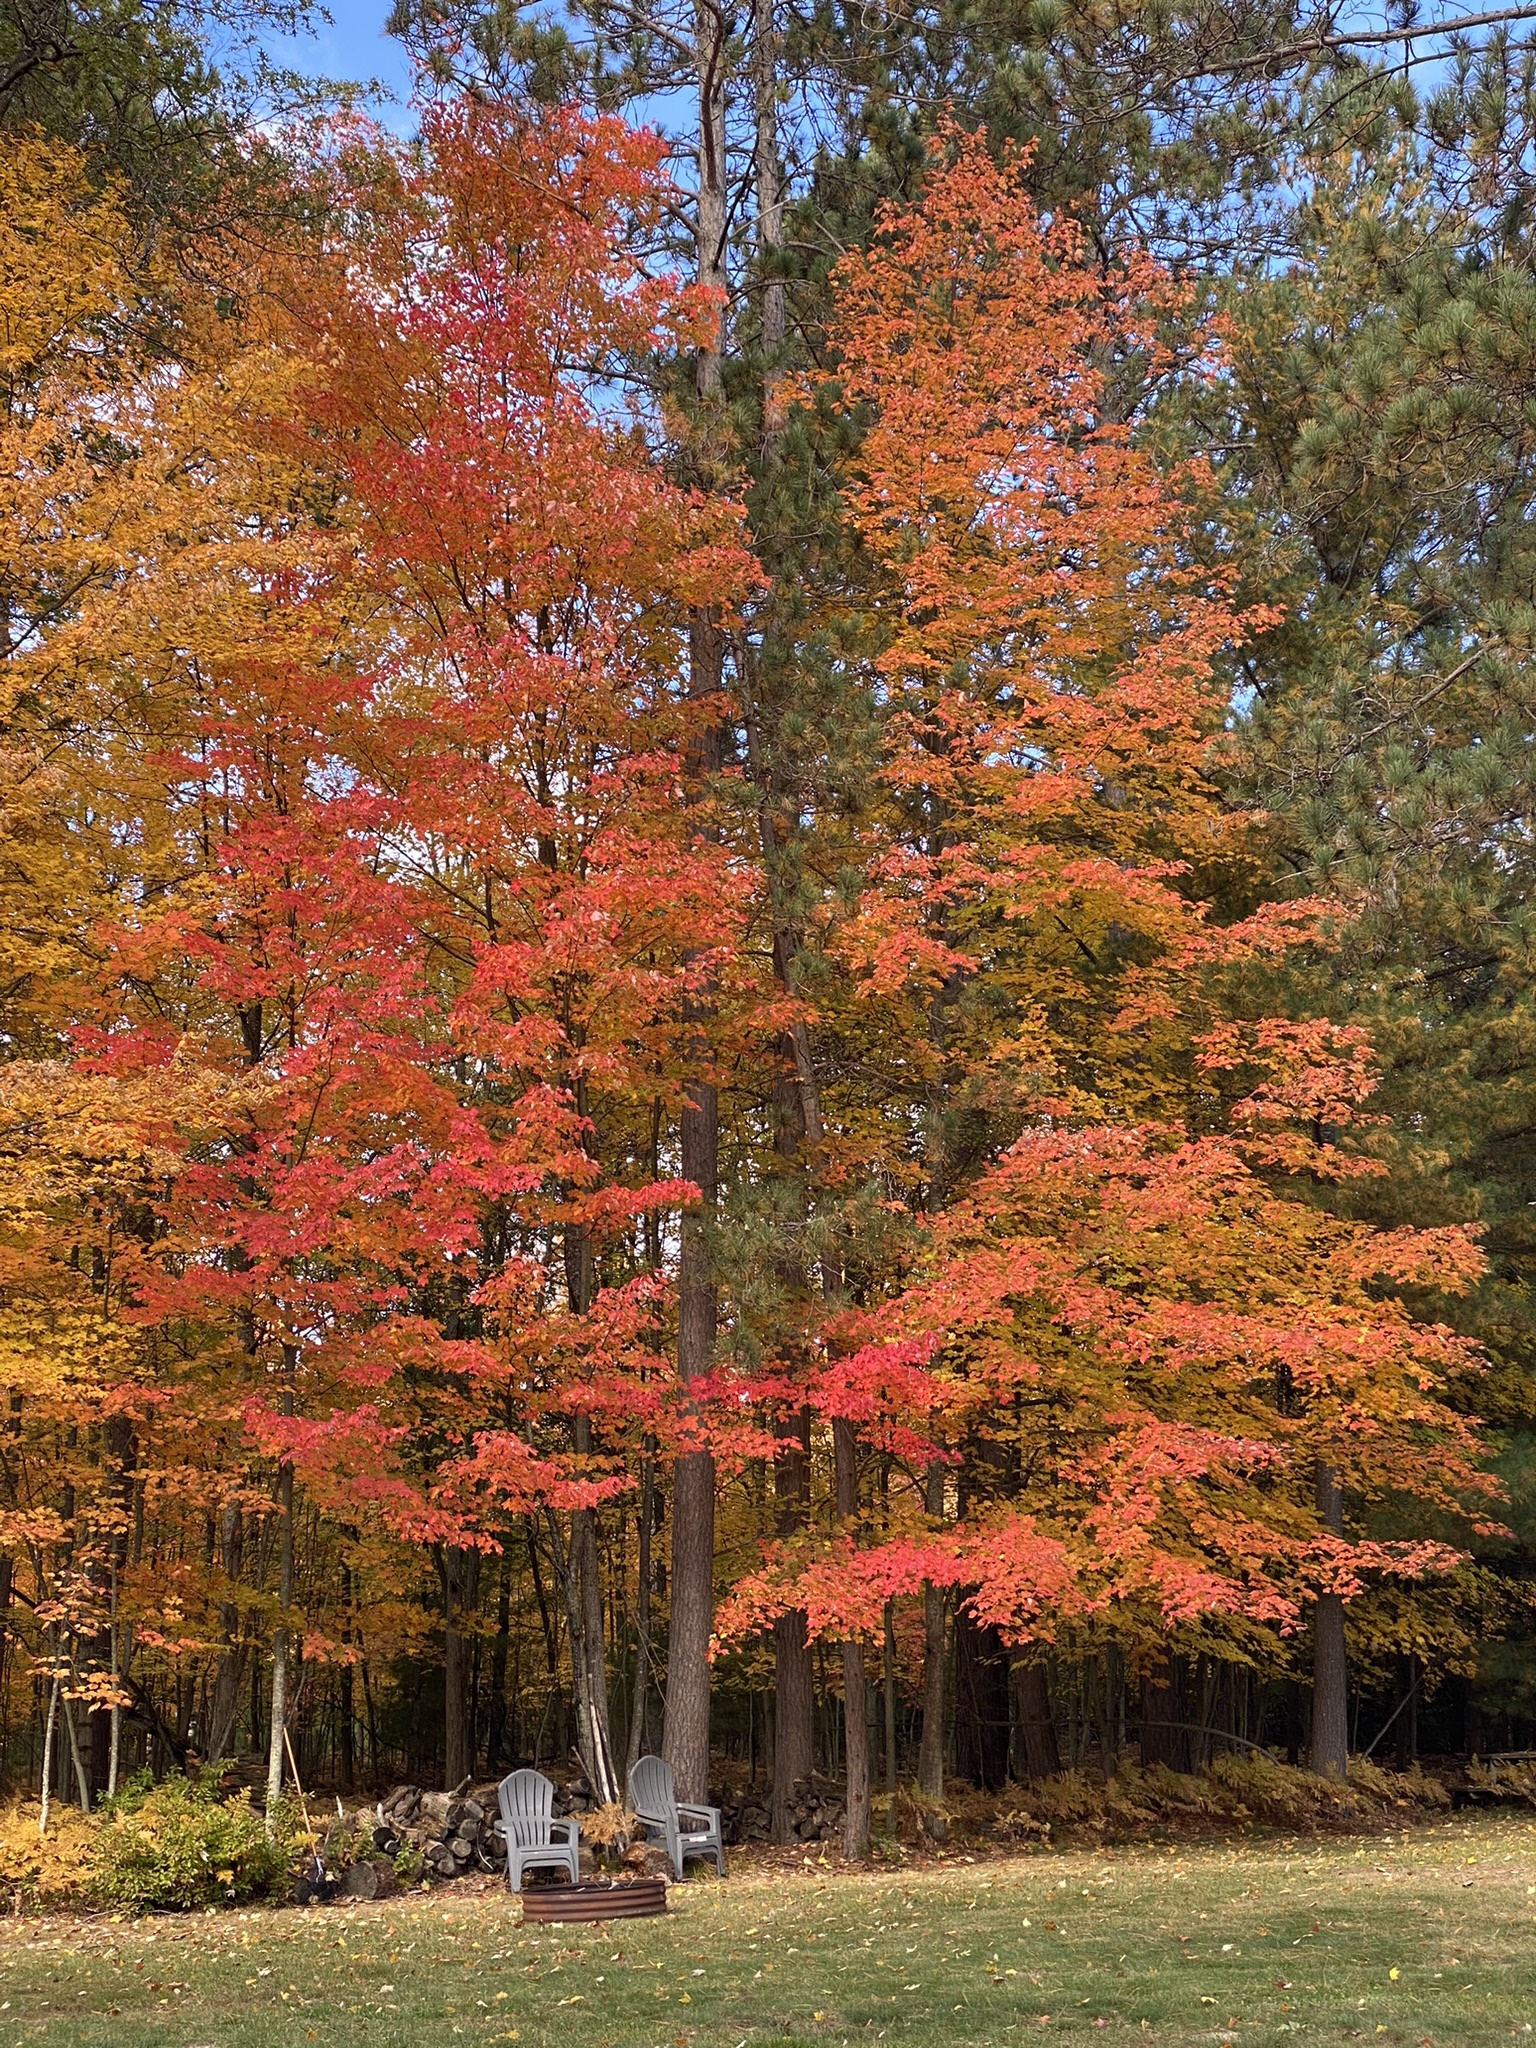 Image of trees in Michigan with vibrant fall colors.